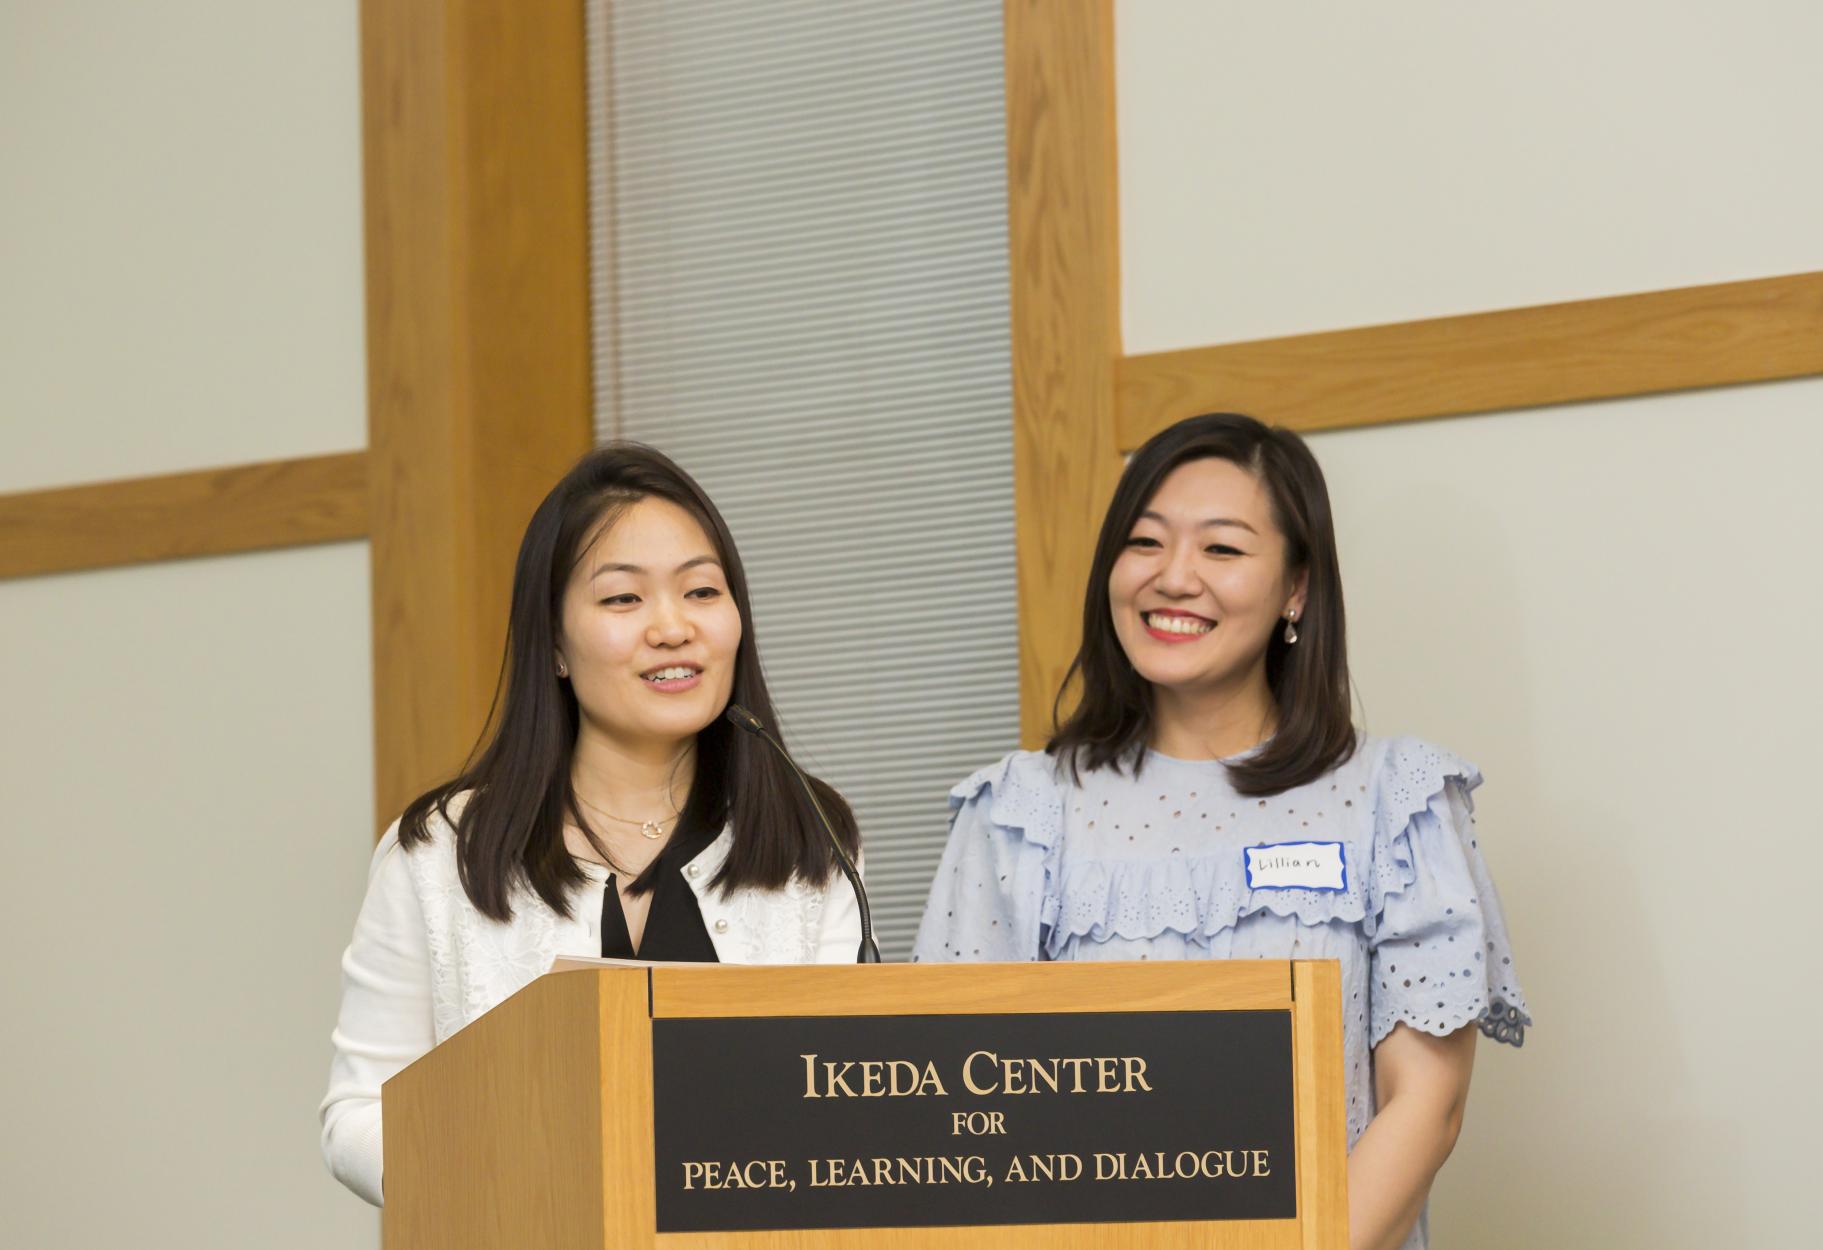 Staff members Anri Tanabe and Lillian I share opening words at the 2019 Ikeda Forum.